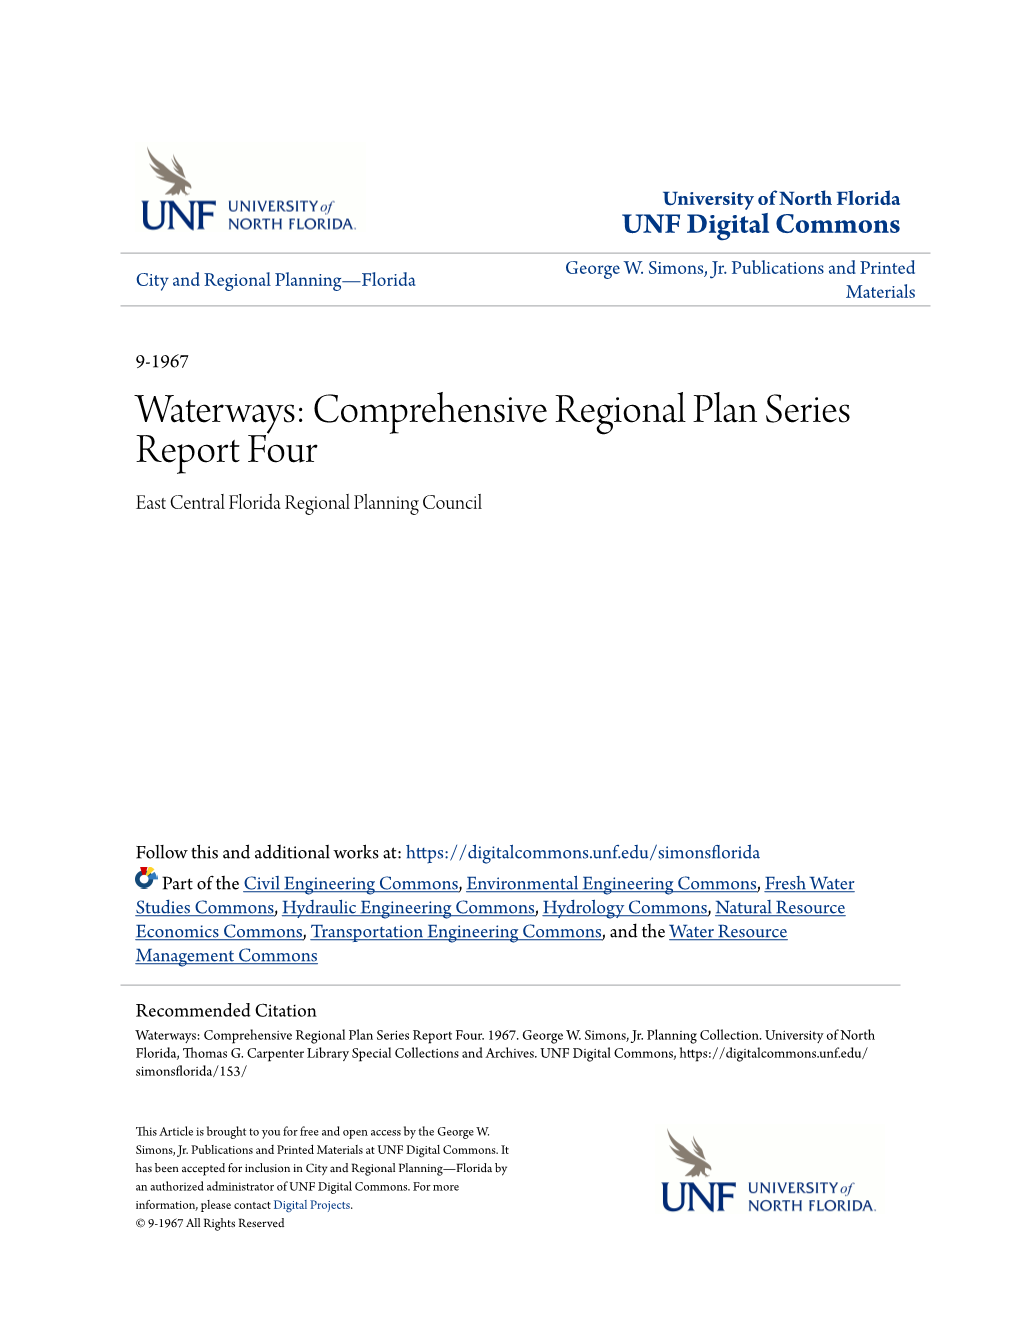 Waterways: Comprehensive Regional Plan Series Report Four East Central Florida Regional Planning Council